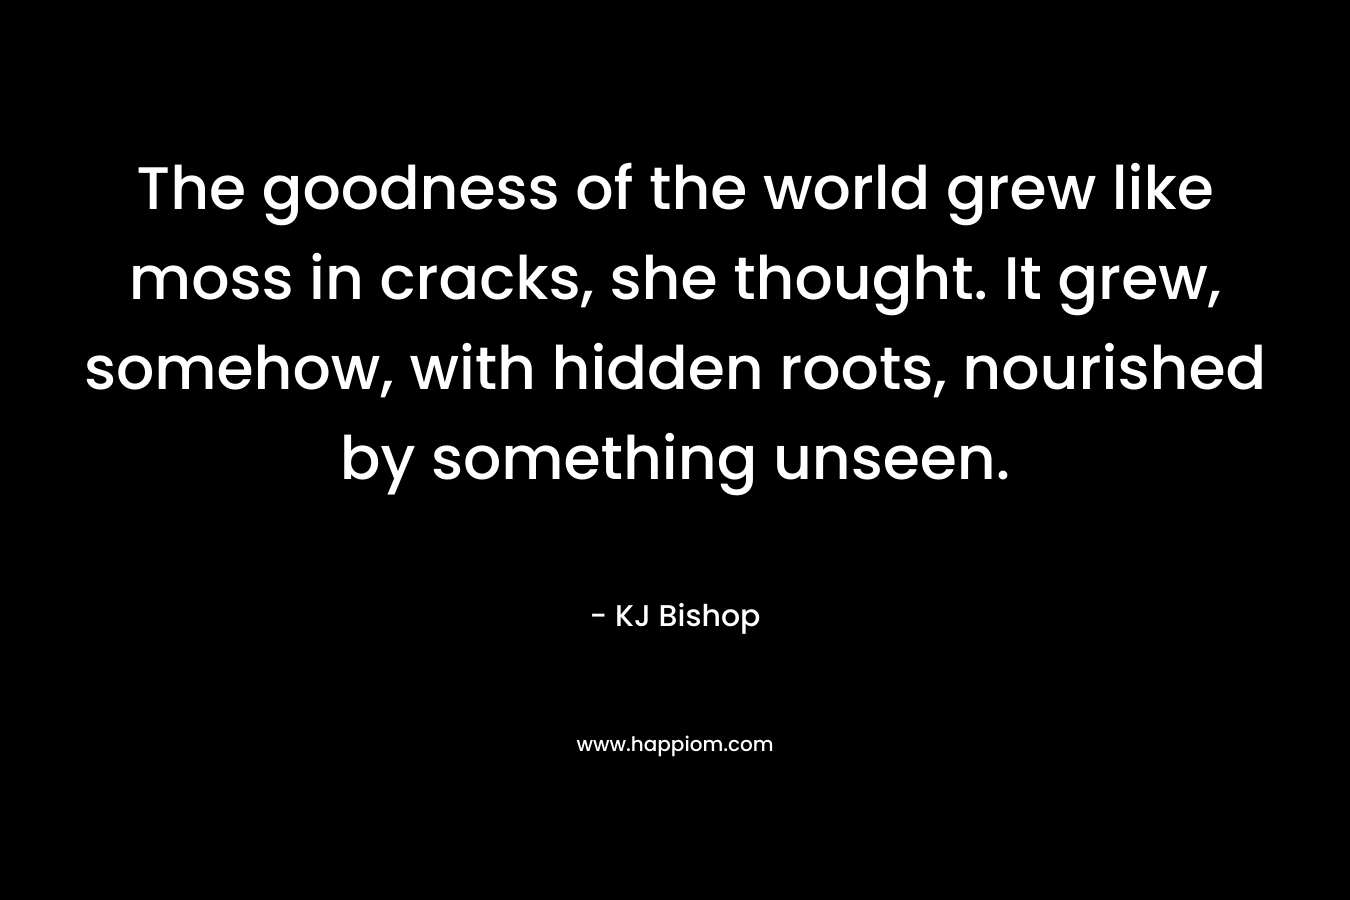 The goodness of the world grew like moss in cracks, she thought. It grew, somehow, with hidden roots, nourished by something unseen.